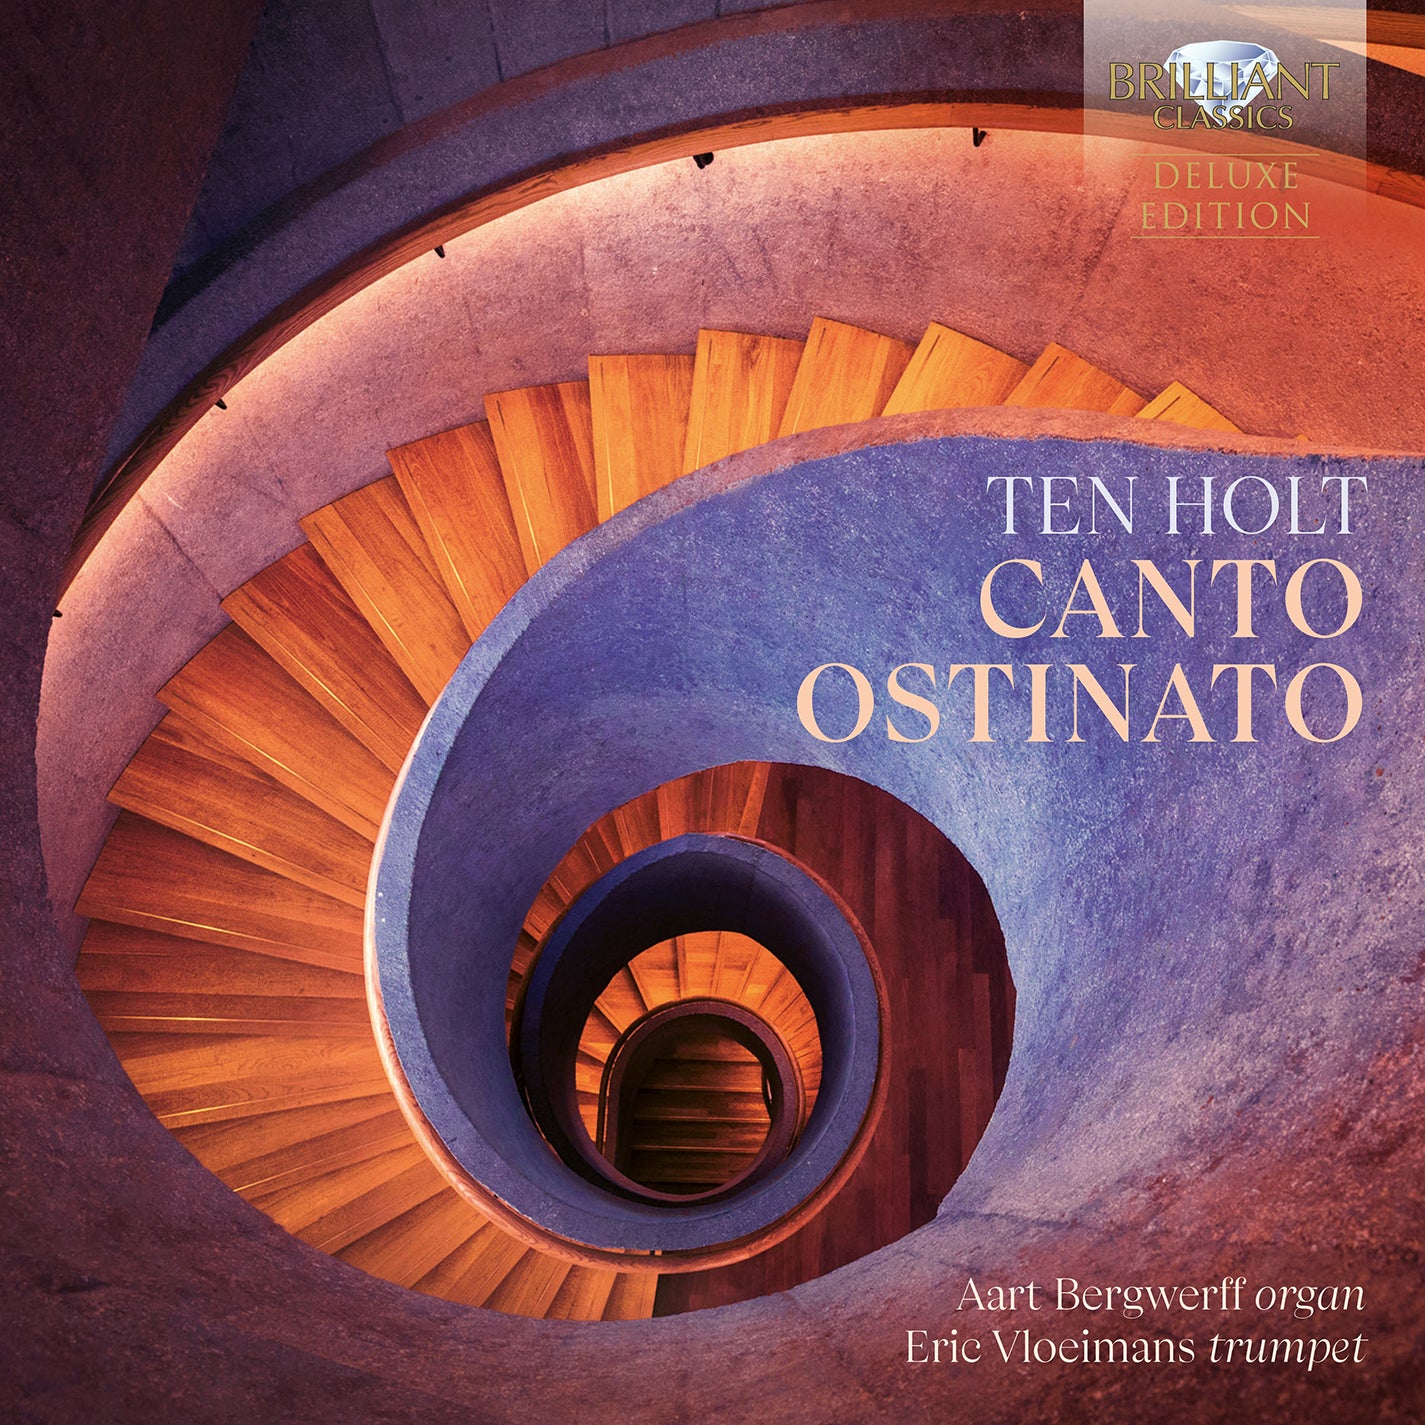 Holt: Canto Ostinato Arranged for Organ & Trumpet (Deluxe)